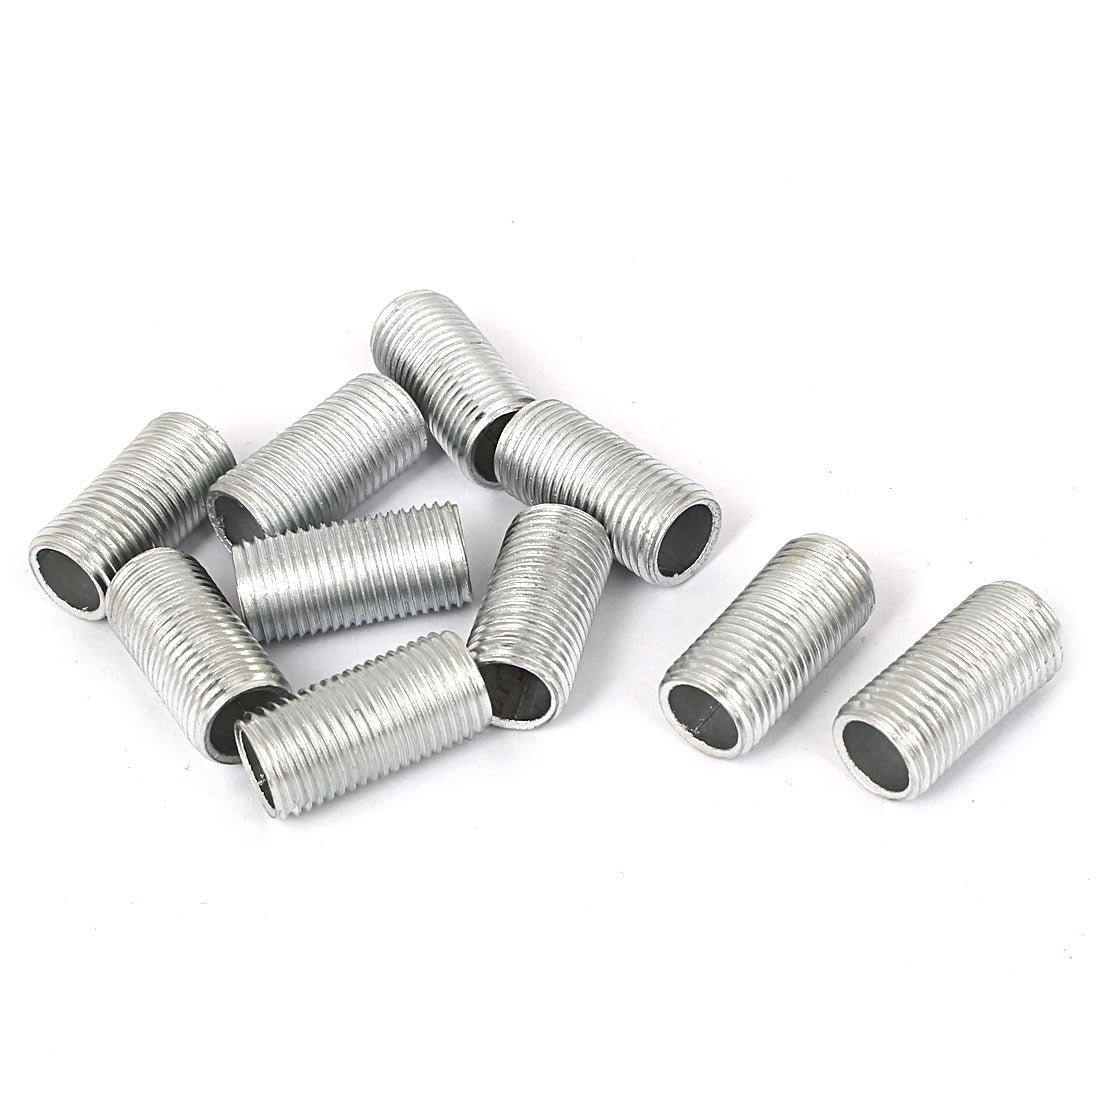 uxcell Uxcell M10 1mm Pitch Threaded Zinc Alloy Pipe Nipple Lamp Repair Part 20mm Long 10pcs